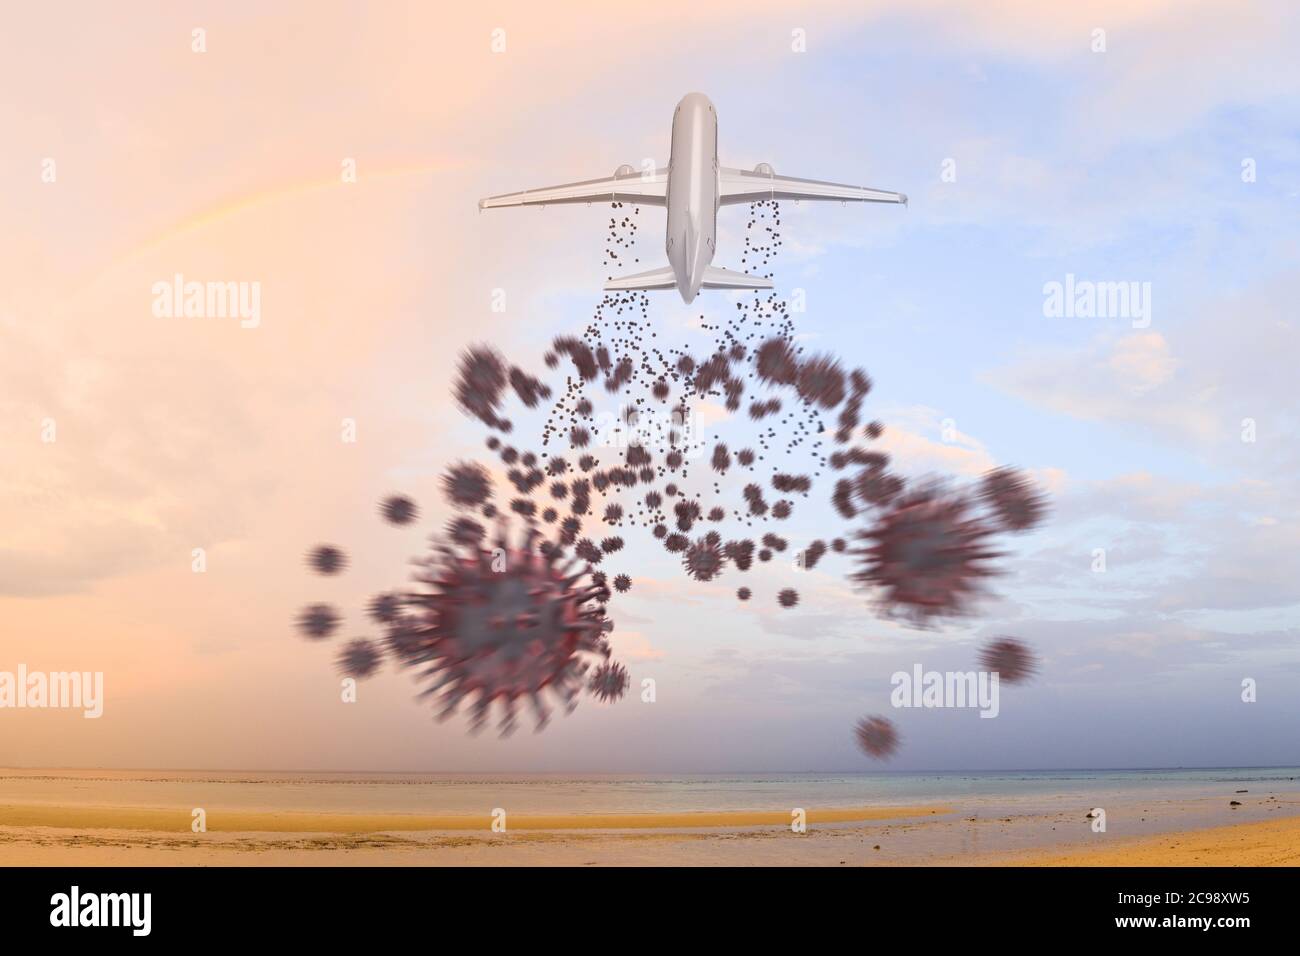 Spreading the corona virus concept: A starting airplane emitting corona viruses over a beach during sunset - metaphor for tourists spreading the virus Stock Photo